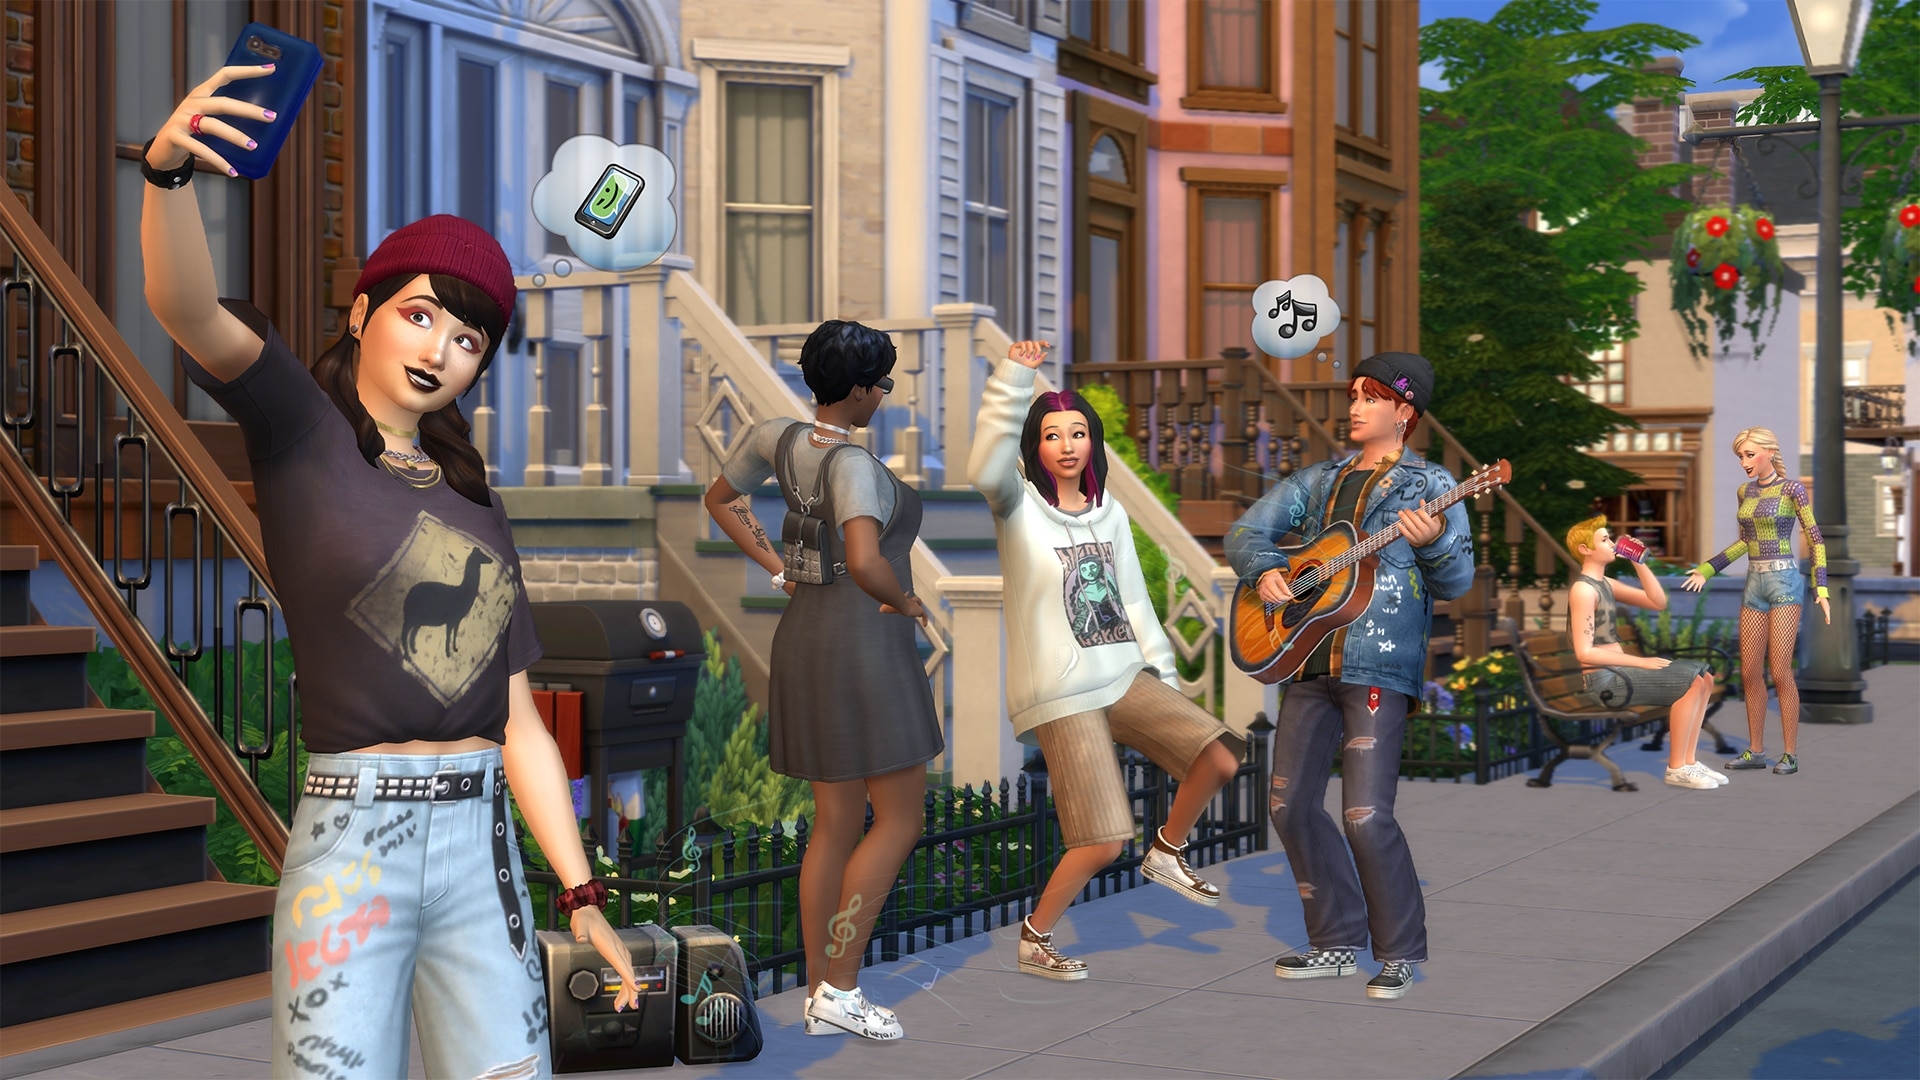 The Sims 5: Anticipation Builds for EA's Next Evolution in Life Simulation